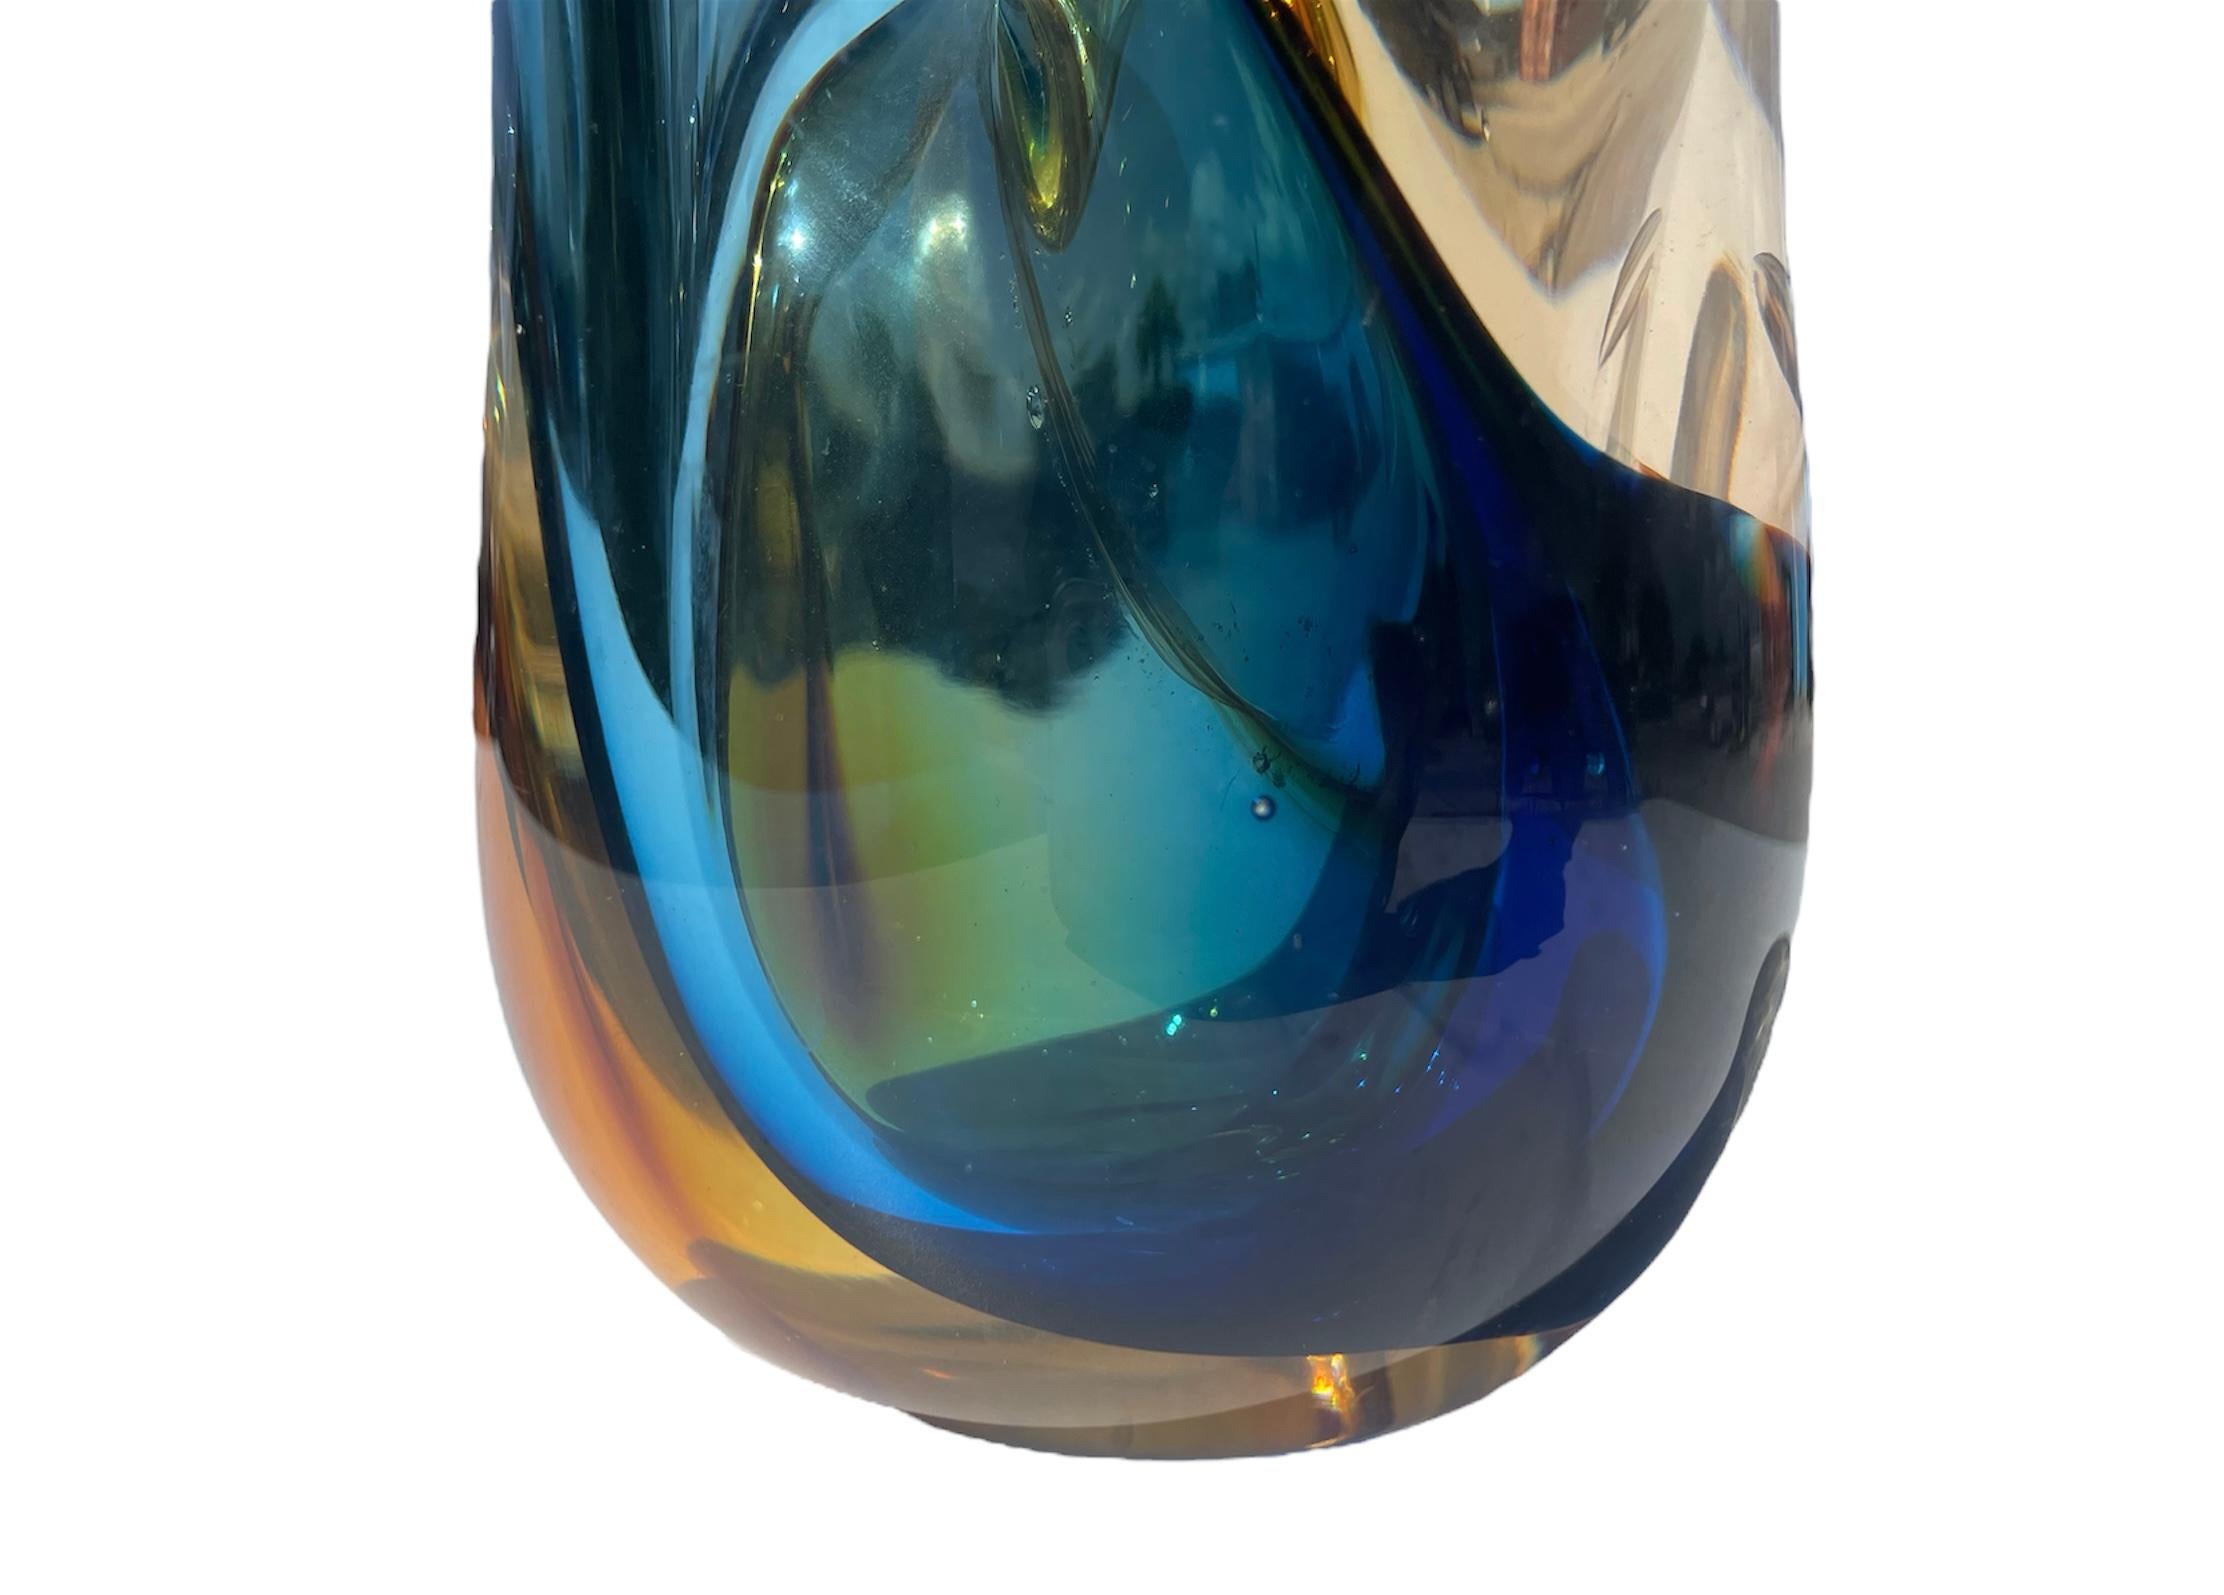 Absolutely stunning piece of art glass, heavy in weight, has the feel of a large paper weight when you pick it up. The colors in the glass are very vivid with various shades of blues and yellows( seen in certain lights and burnt rusty orange. The